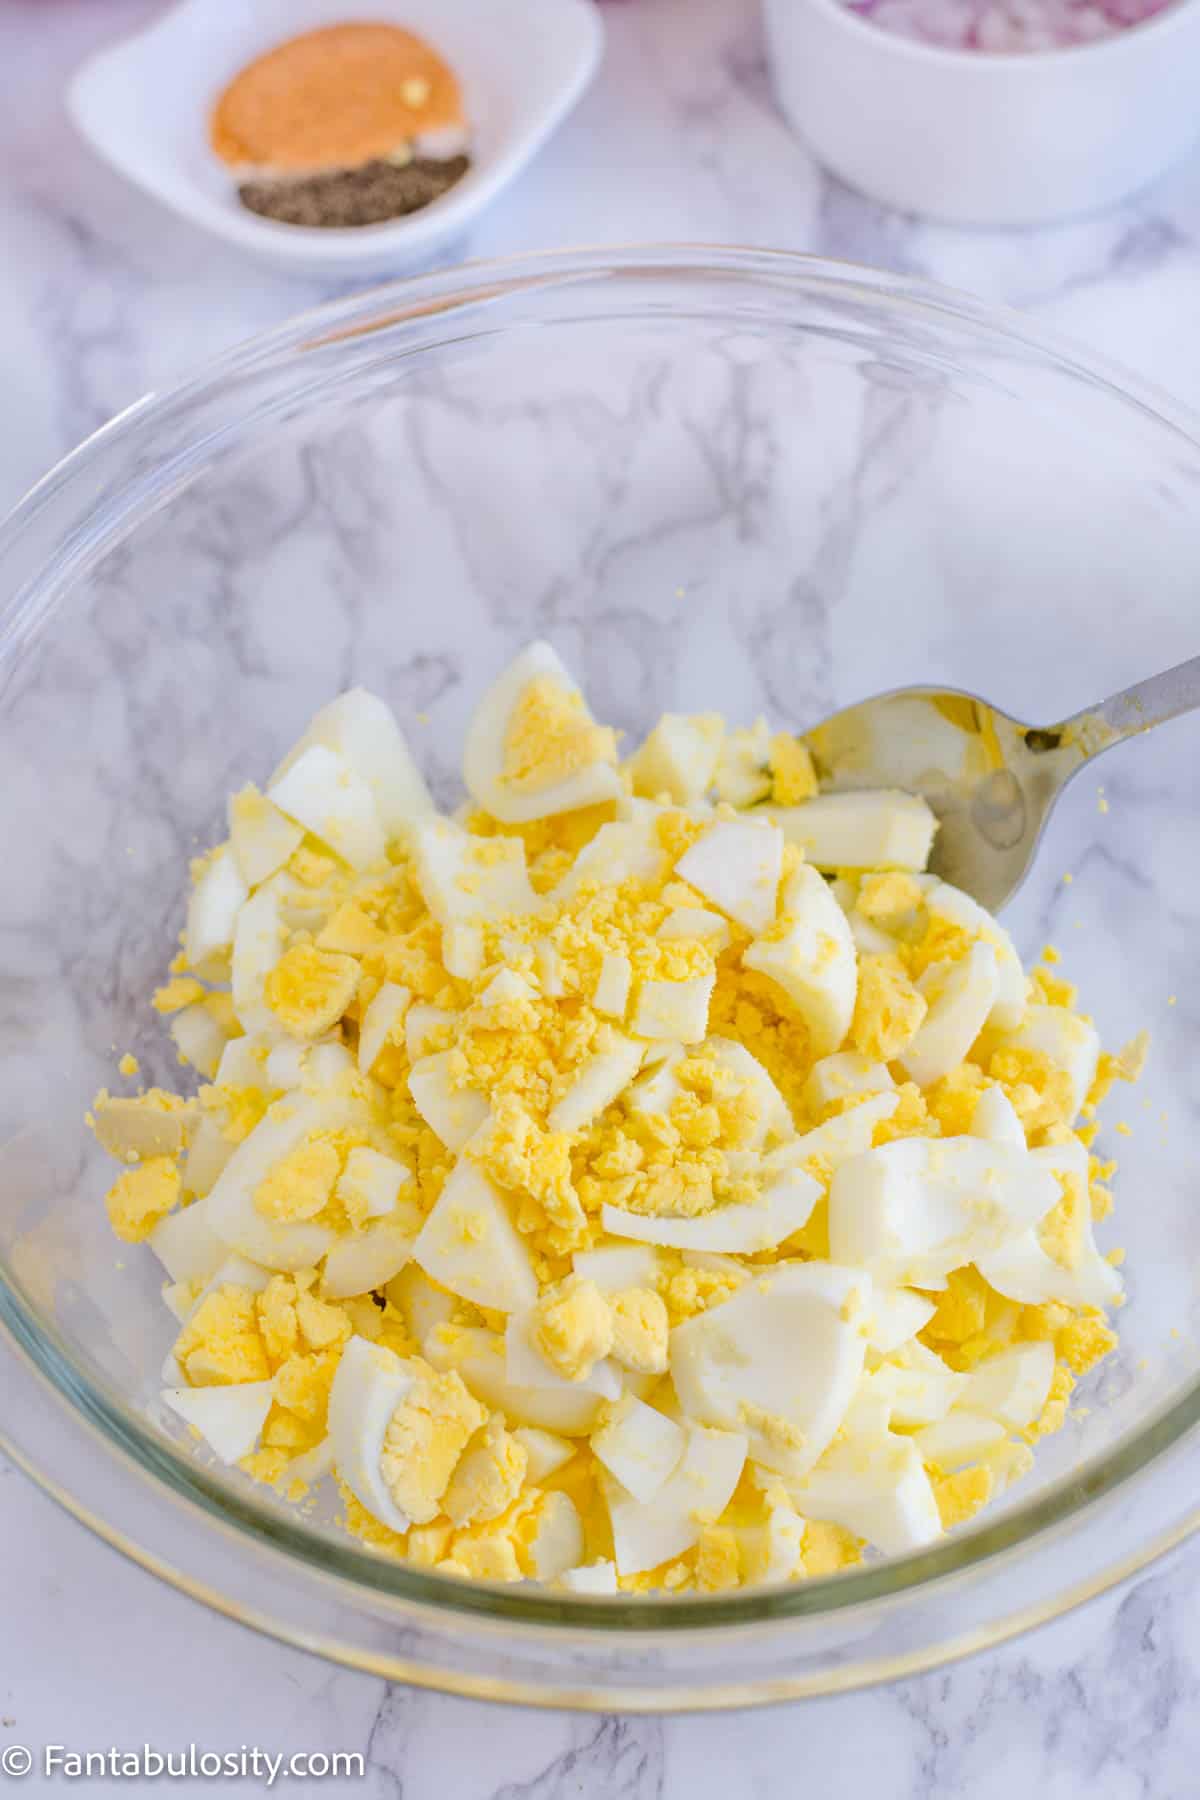 Chopped eggs in mixing bowl